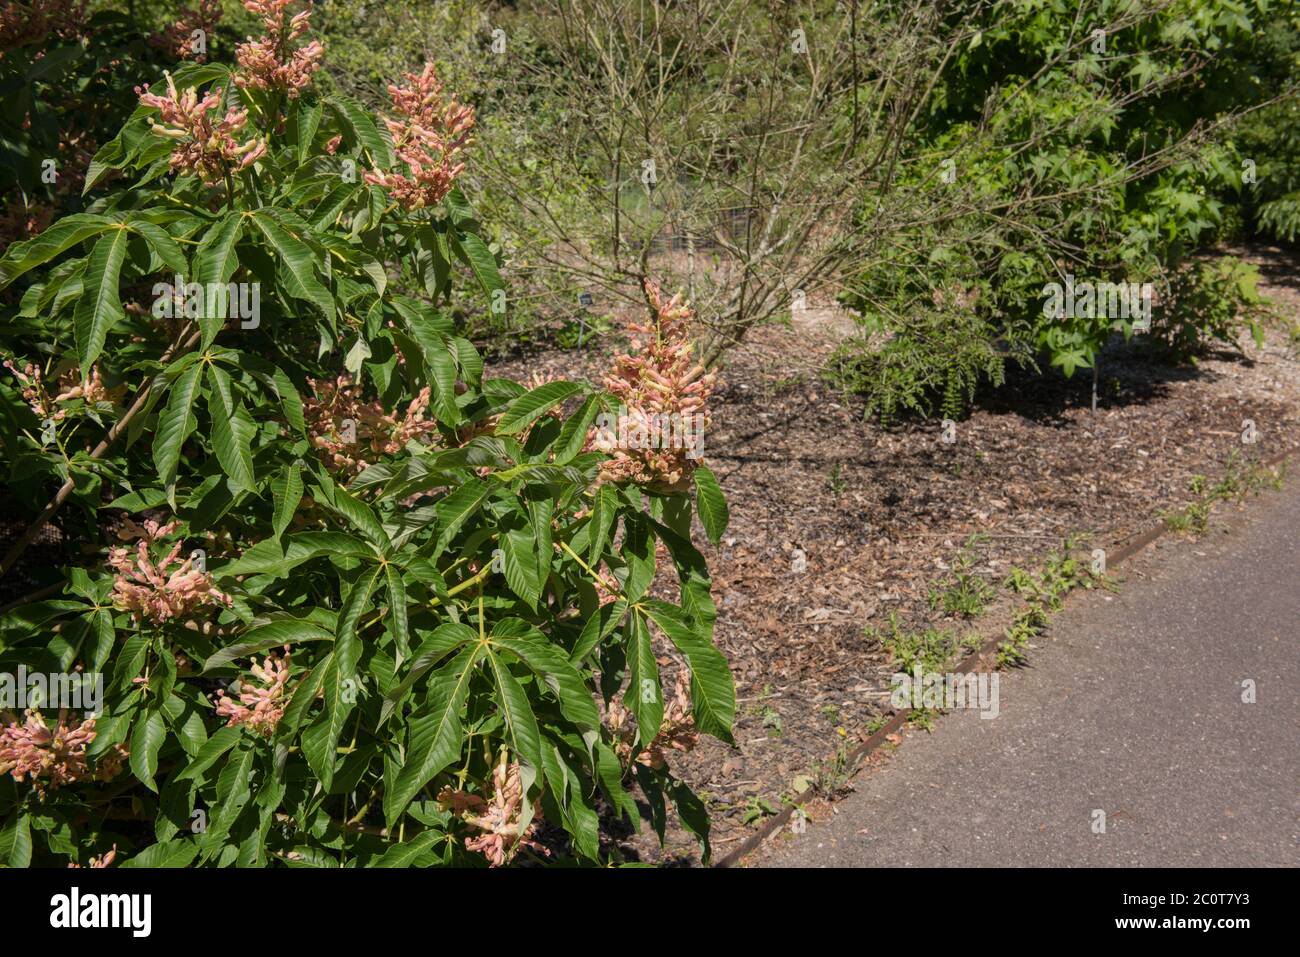 Summer Foliage and Flower Heads of the Deciduous Chestnut Tree (Aesculus x mutabilis 'Induta') in a Garden in Rural Devon, England, UK Stock Photo